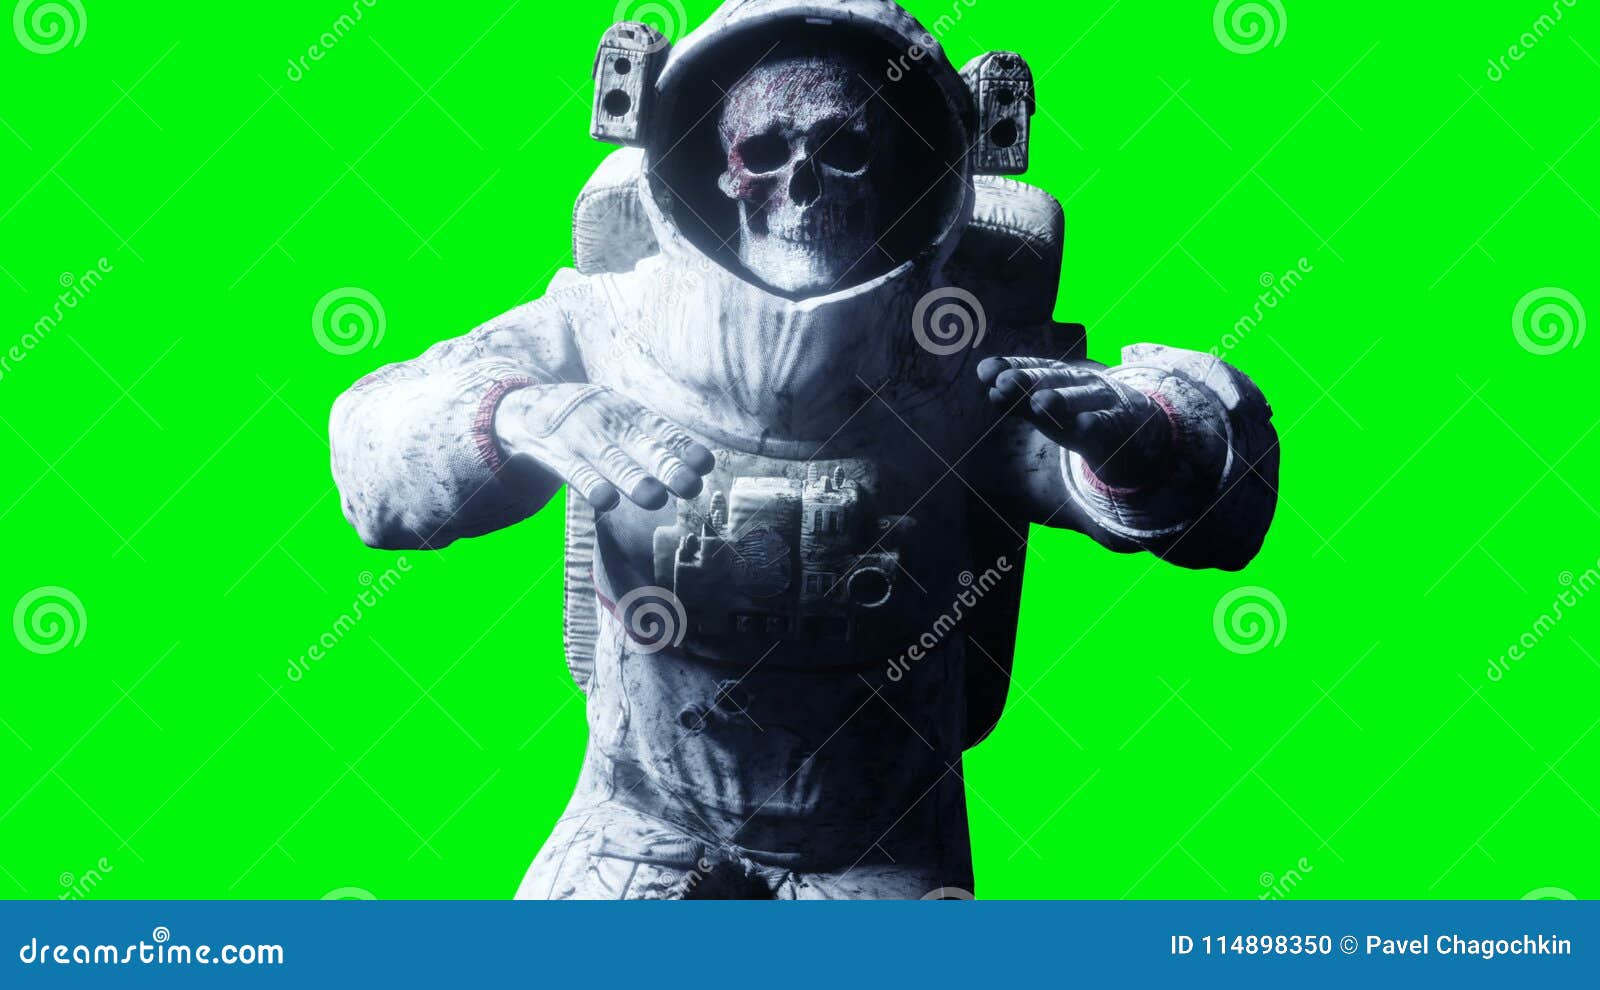 Dead zombie astronaut in space. Cadaver., Stock Video